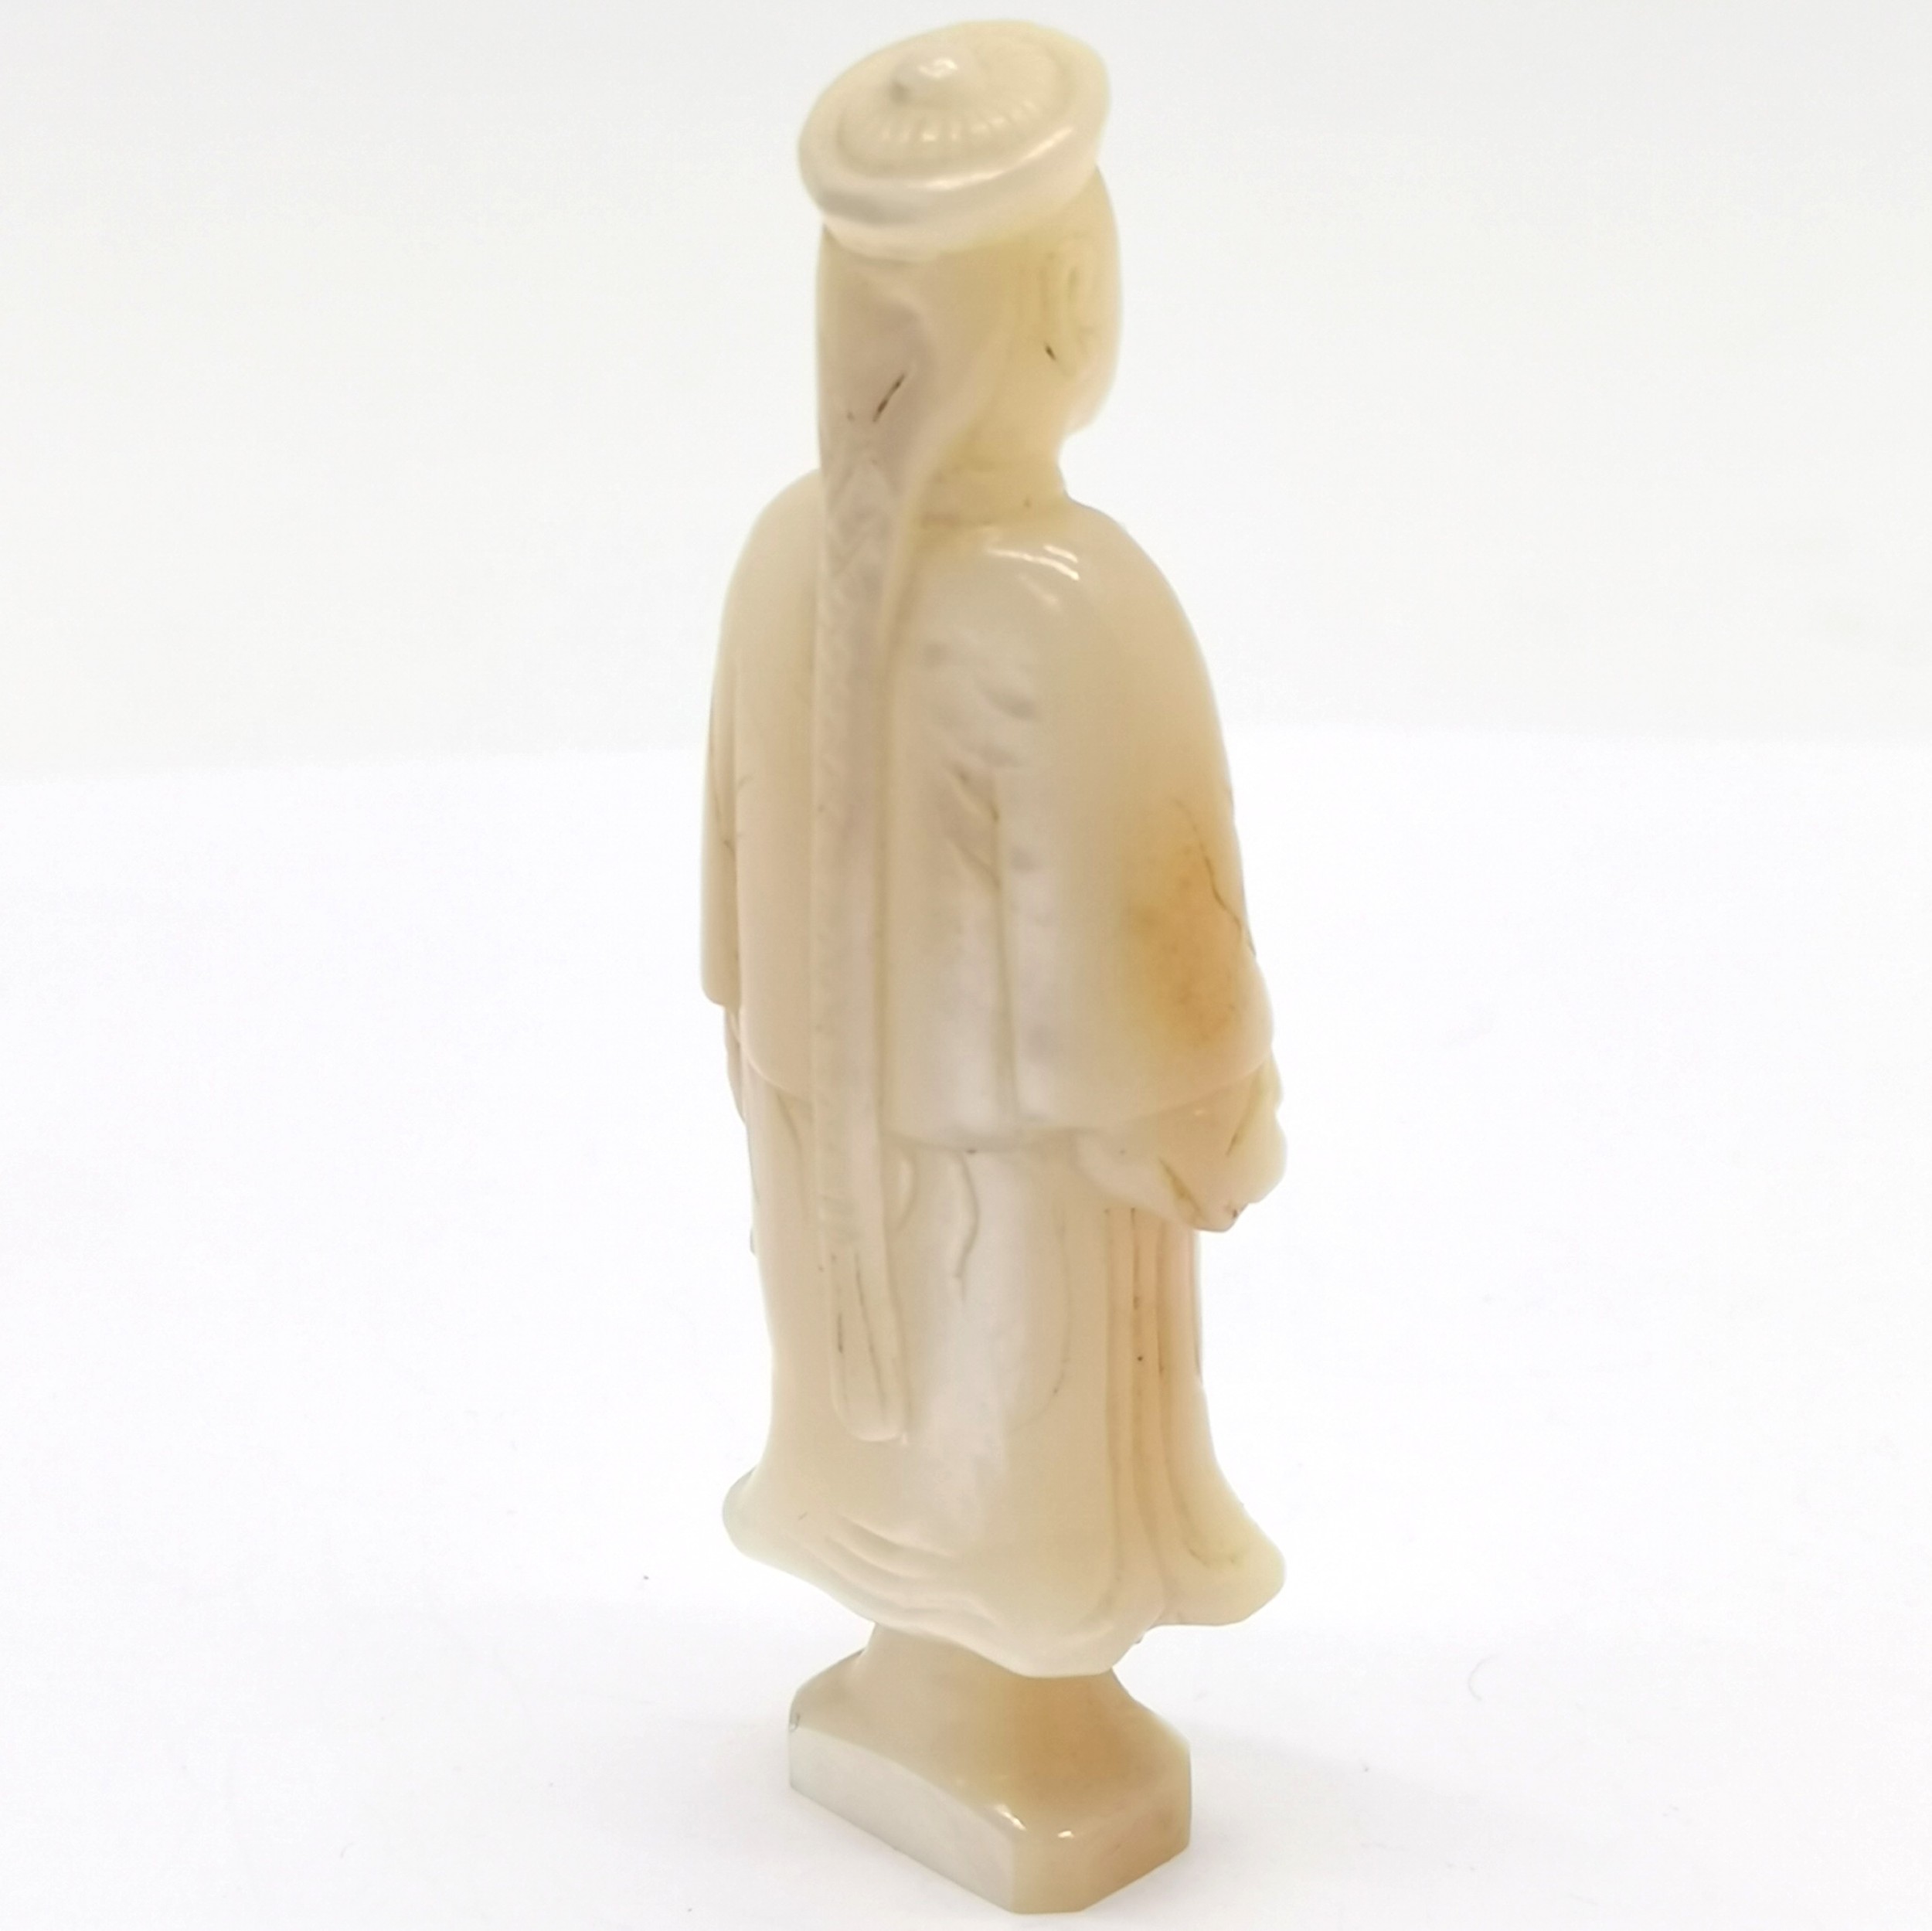 Antique hand carved Chinese mother of pearl desk seal in the form of a mandarin figure - 6.5cm & - Image 2 of 3